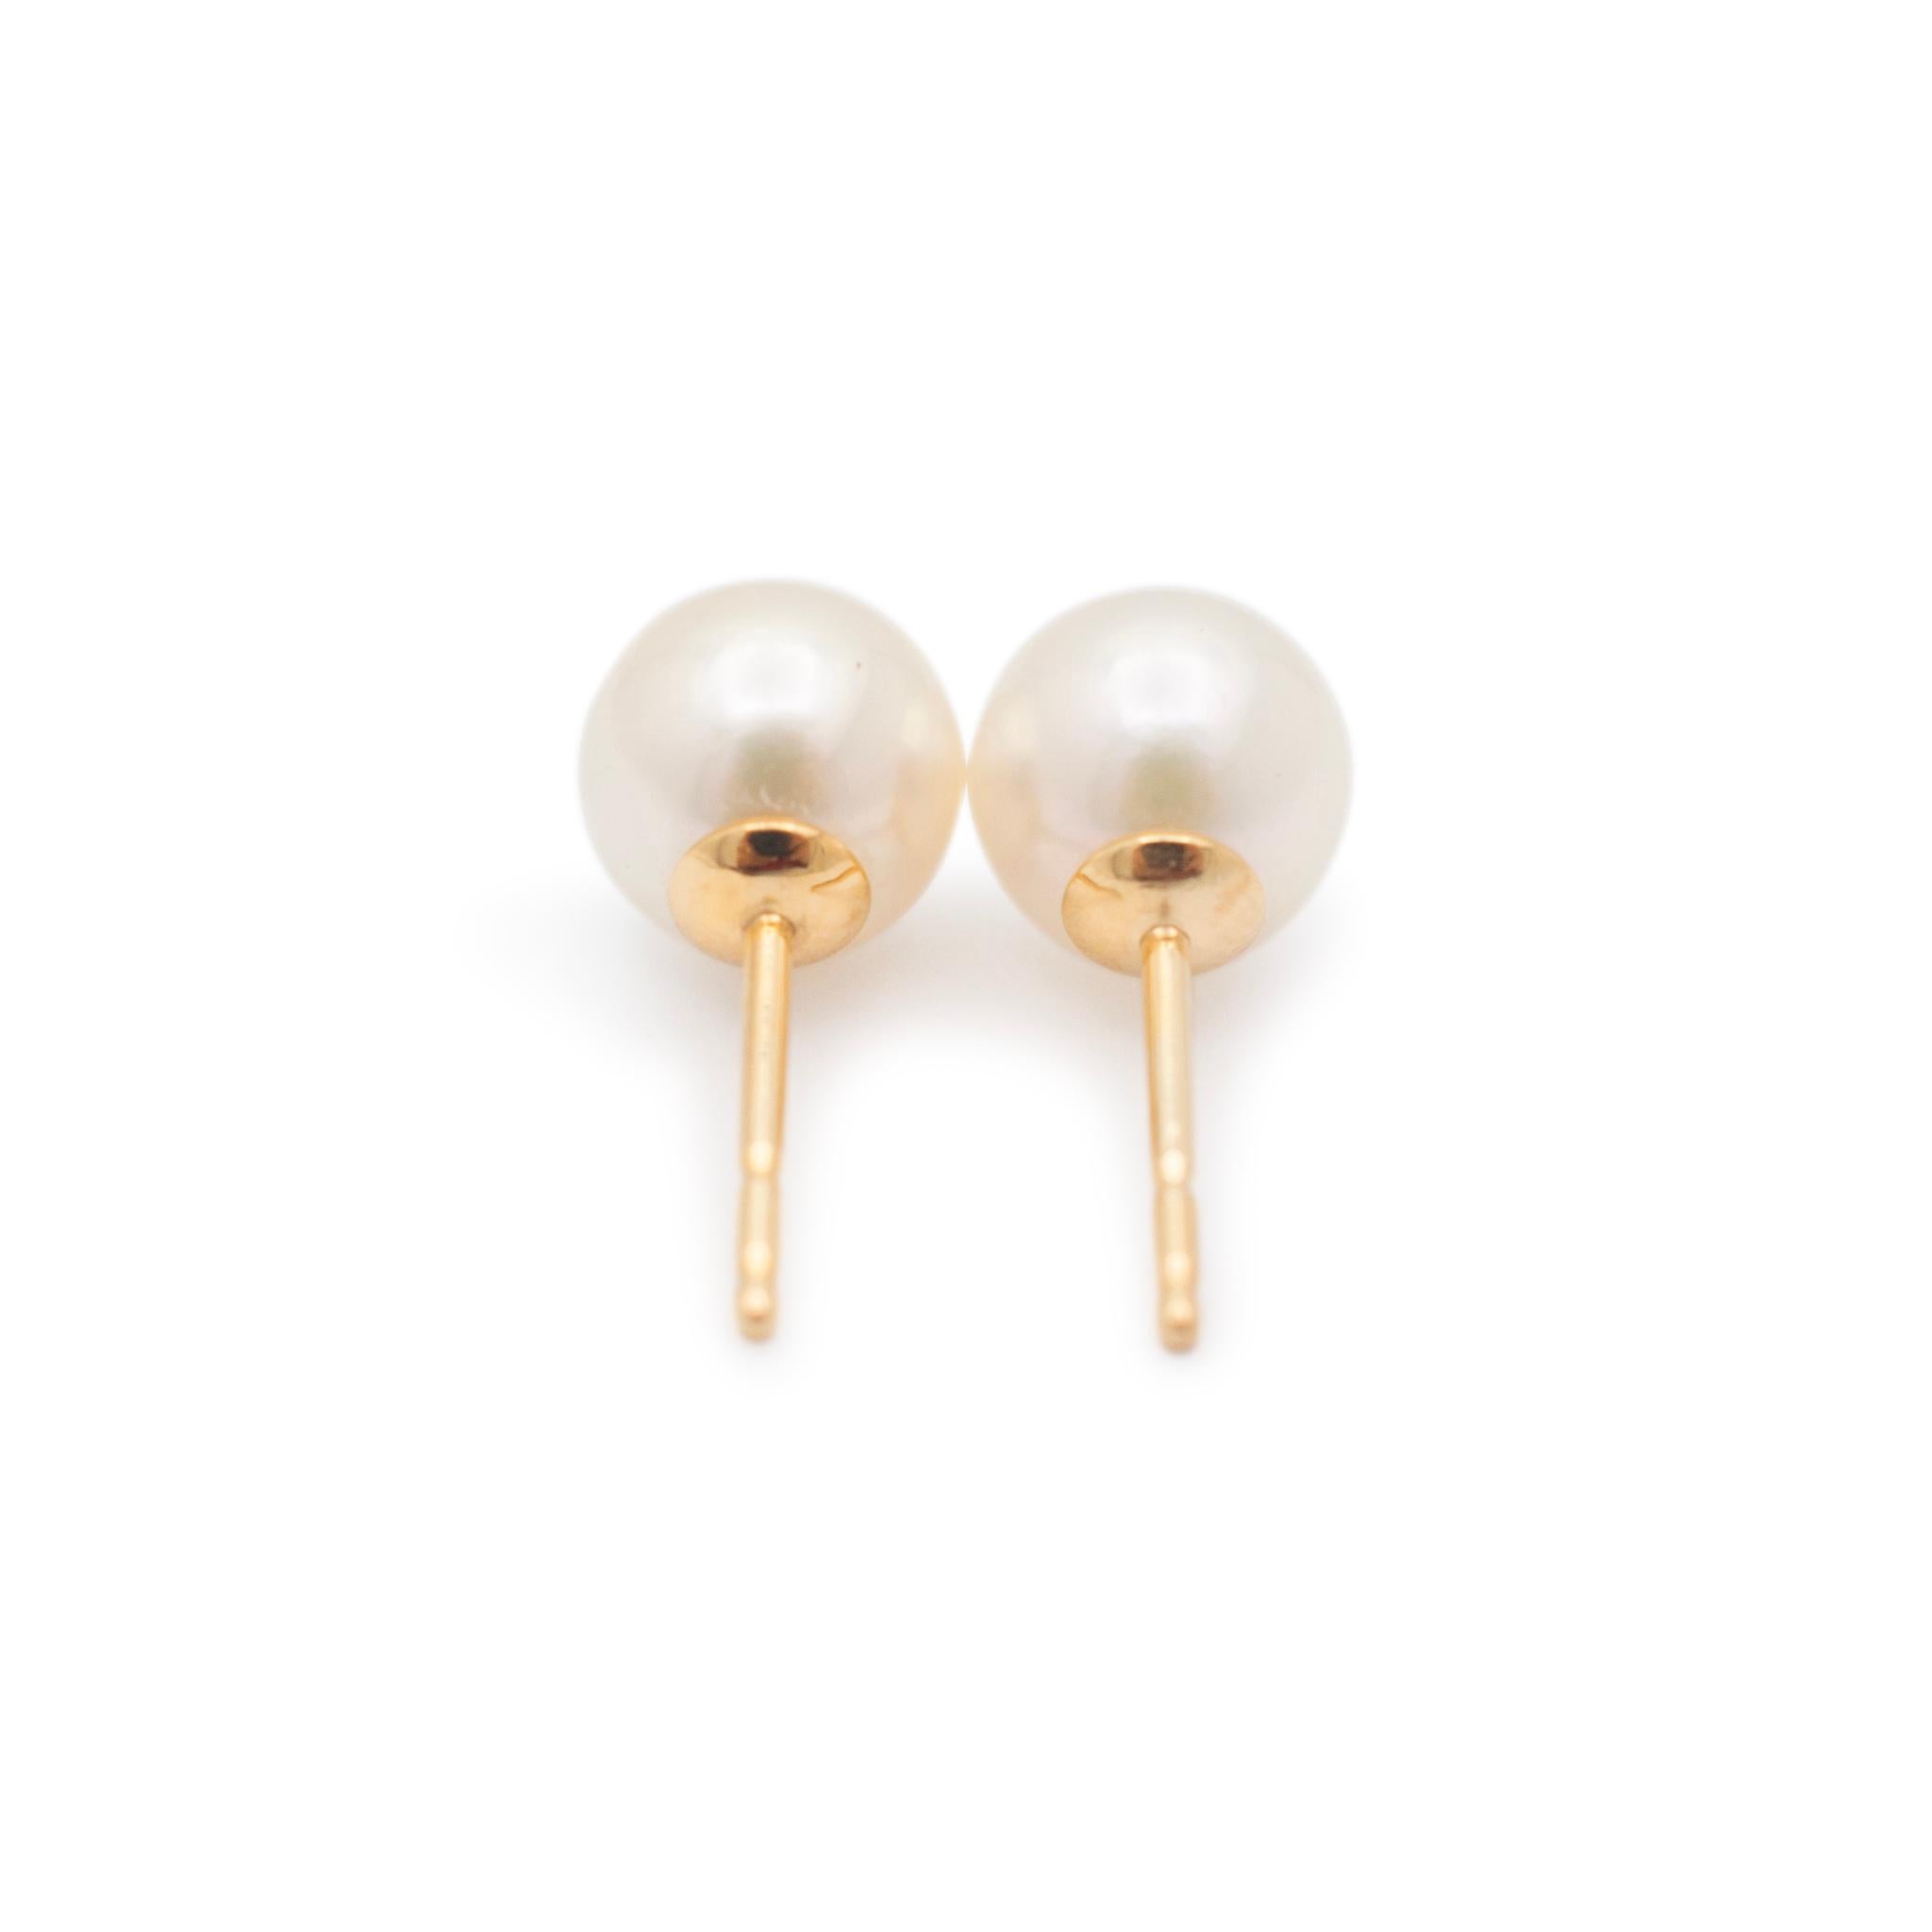 Mikimoto 18K Yellow Gold Akoya Cultured Pearl Push Back Stud Earrings In Excellent Condition For Sale In Houston, TX